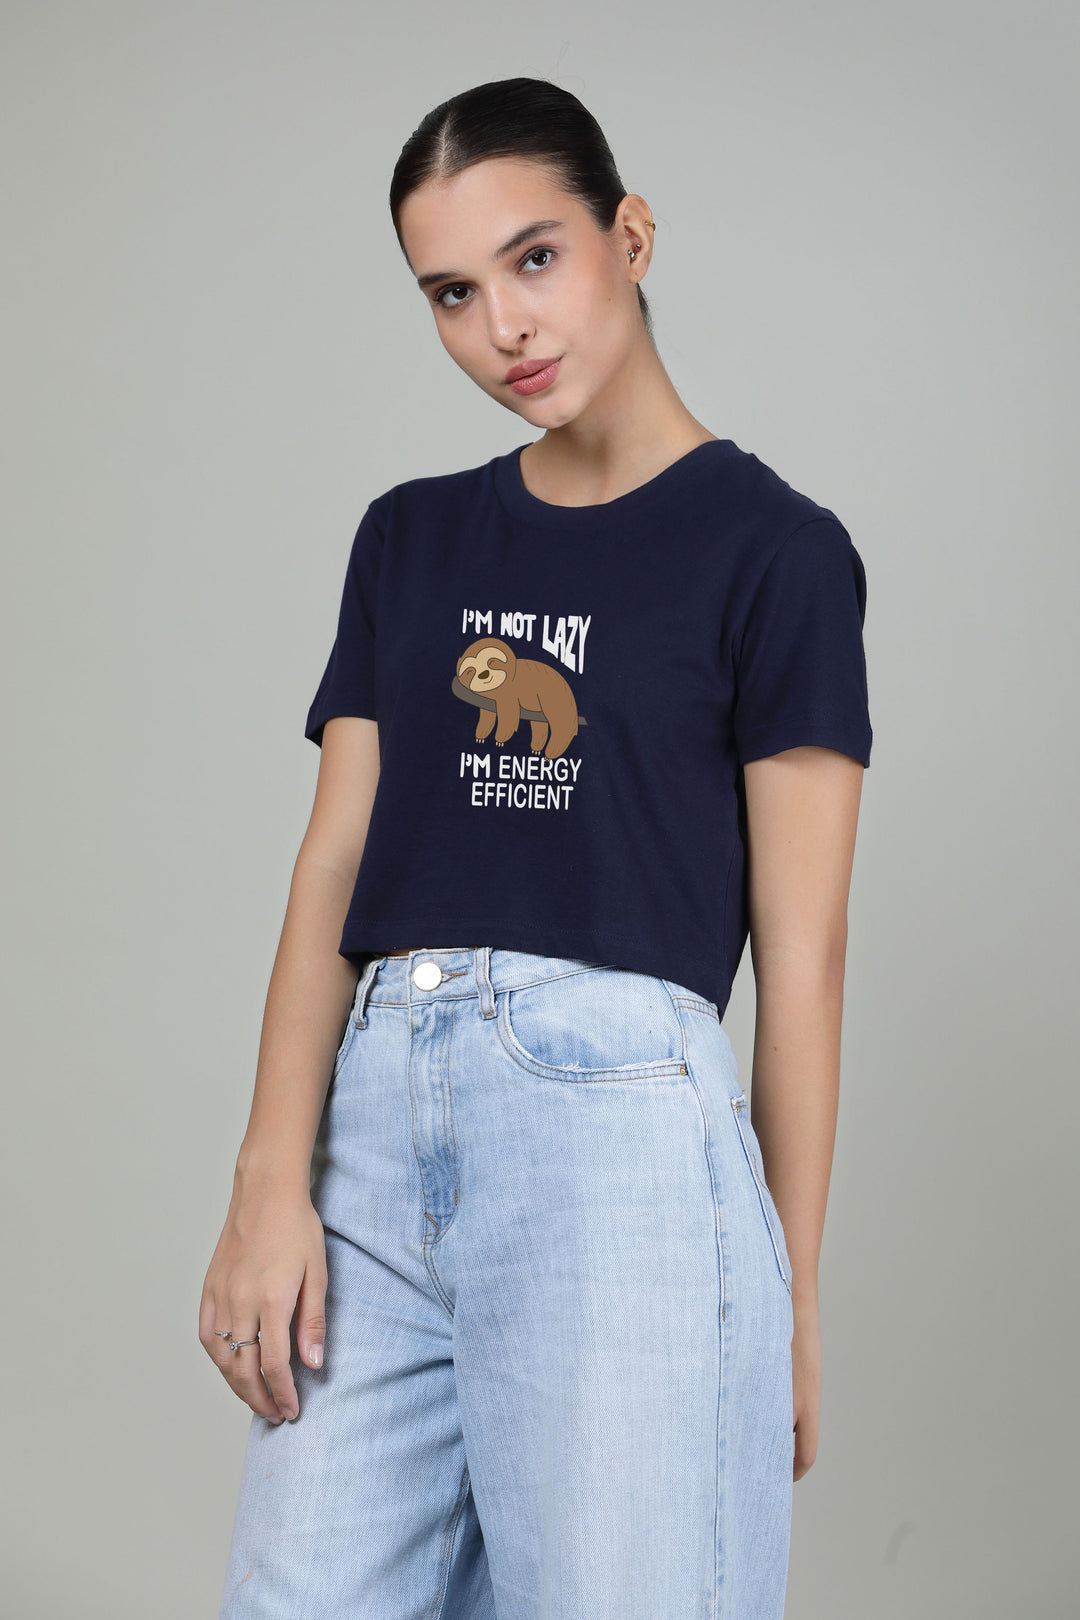 I am not lazy - Printed Crop Top